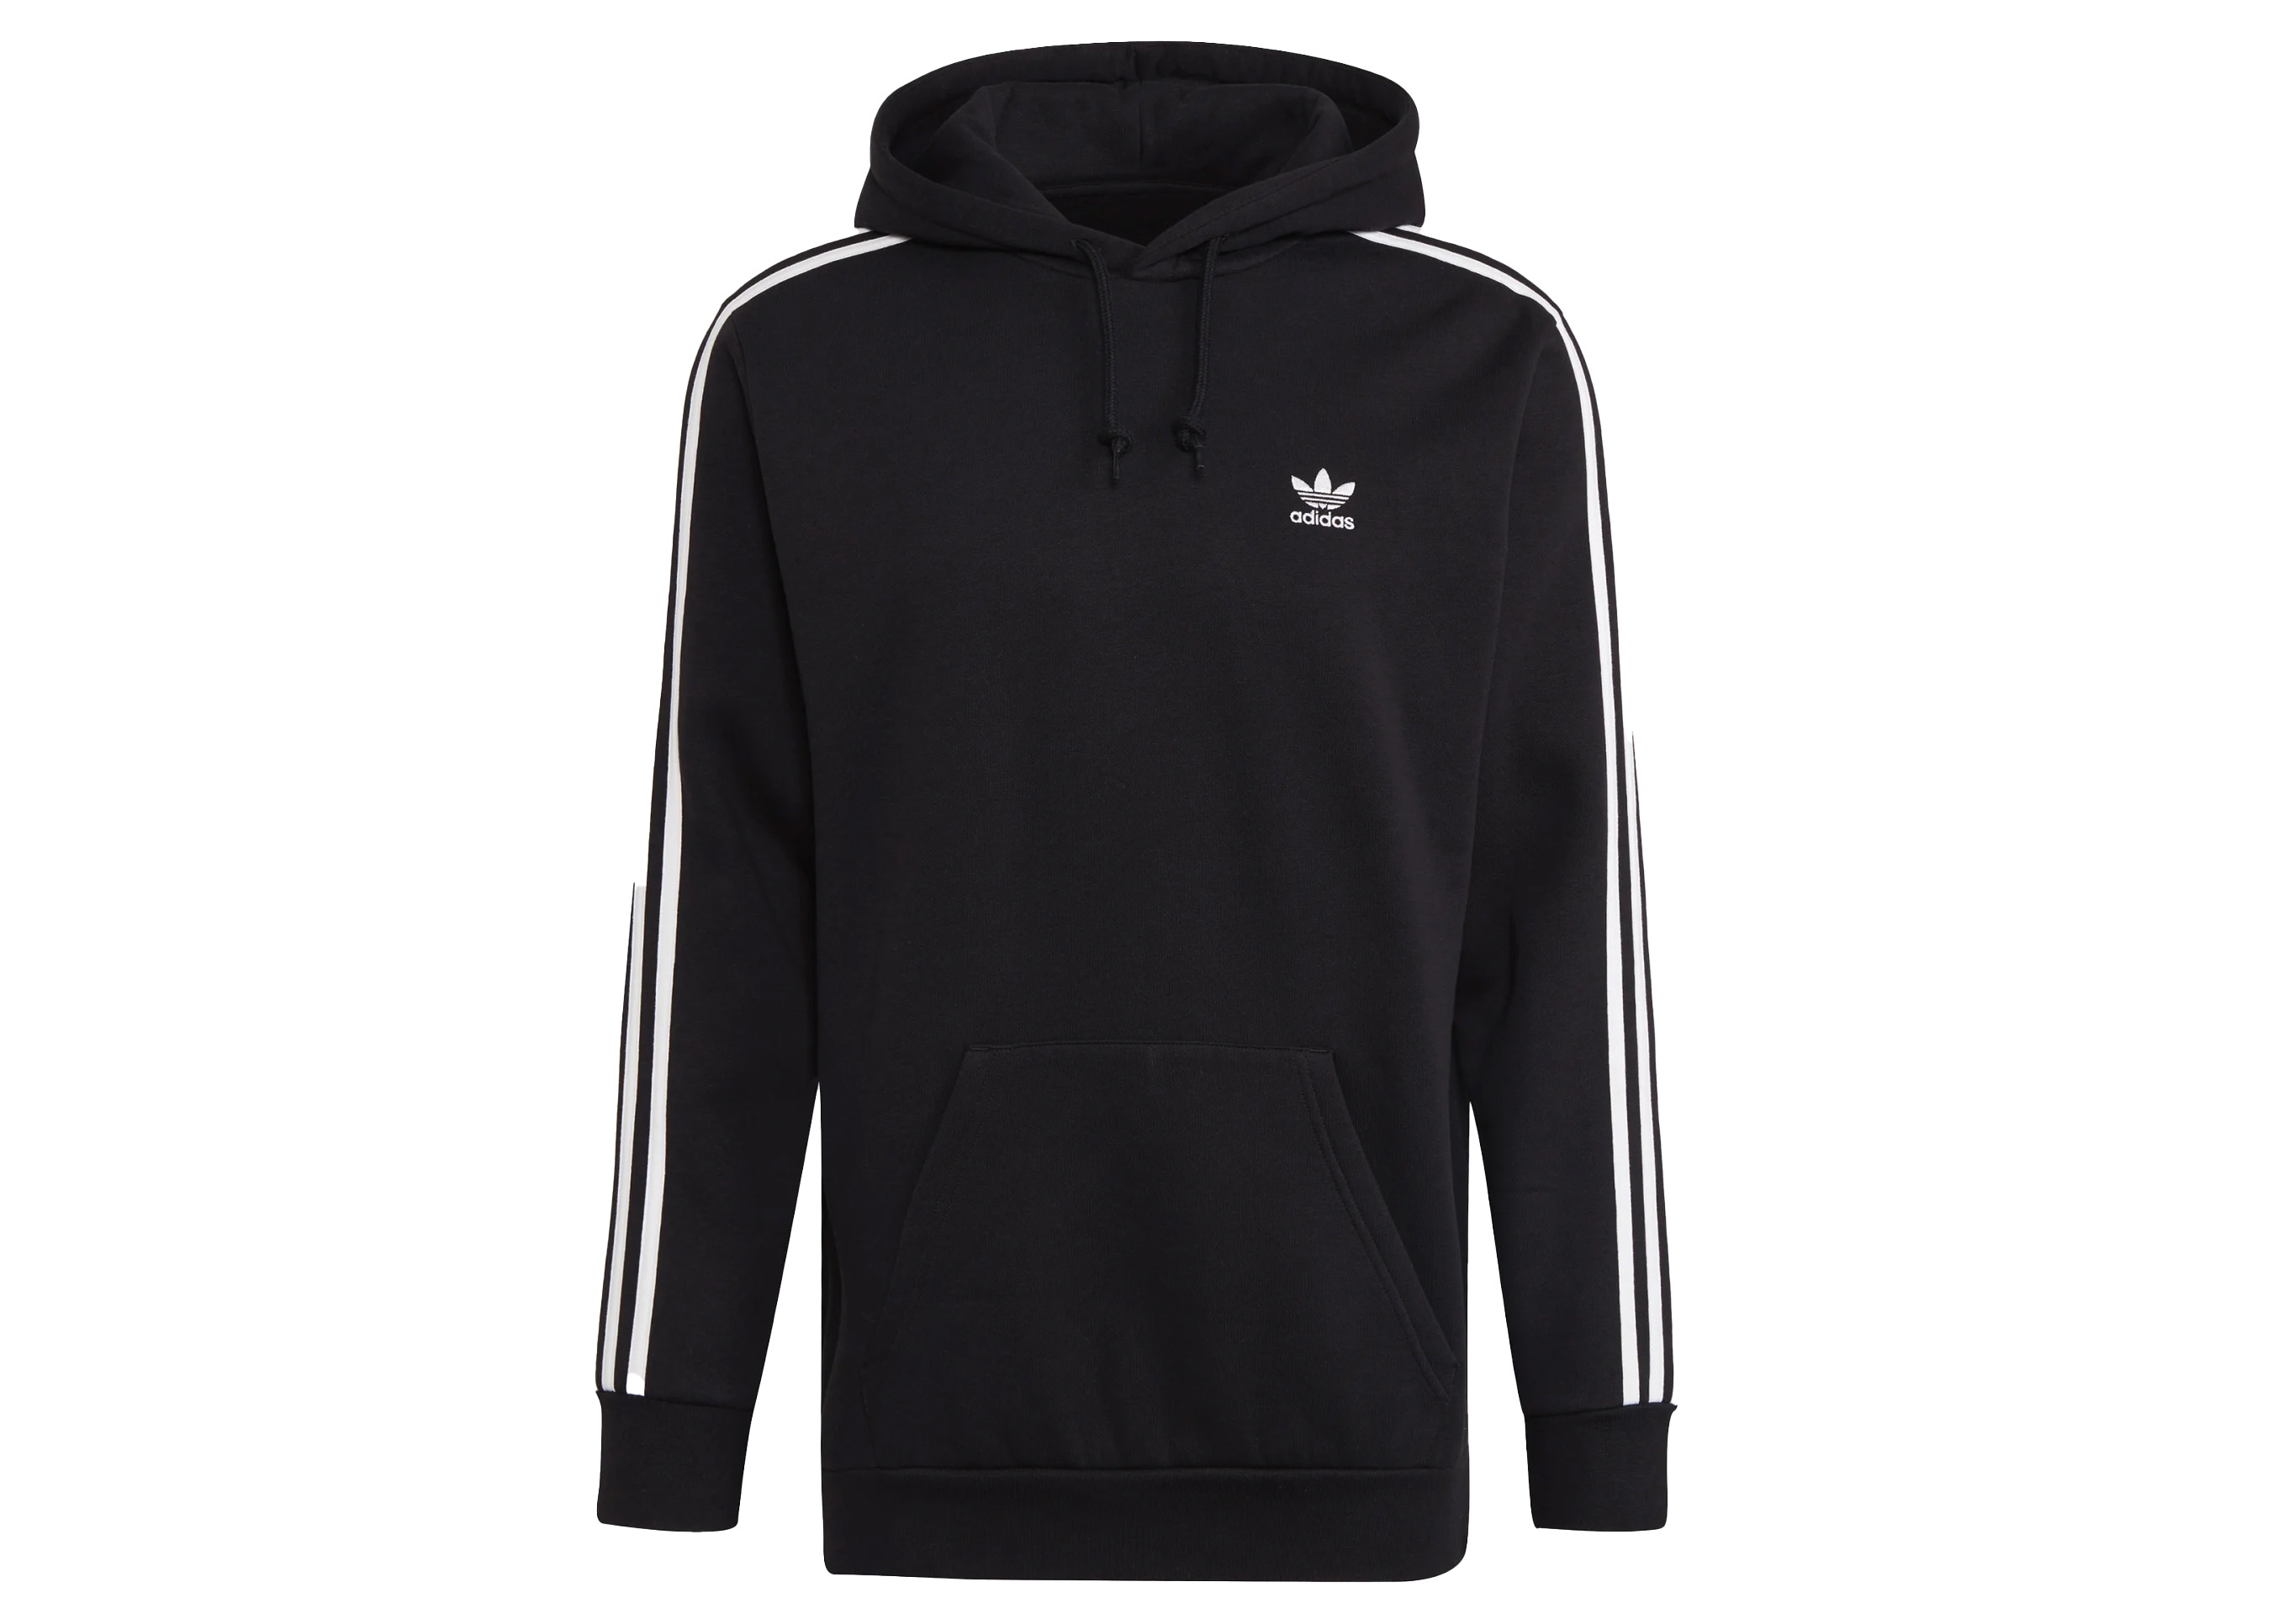 adidas Classic 3-Stripes Pullover Hoodie Black/White Men's - SS23 - US